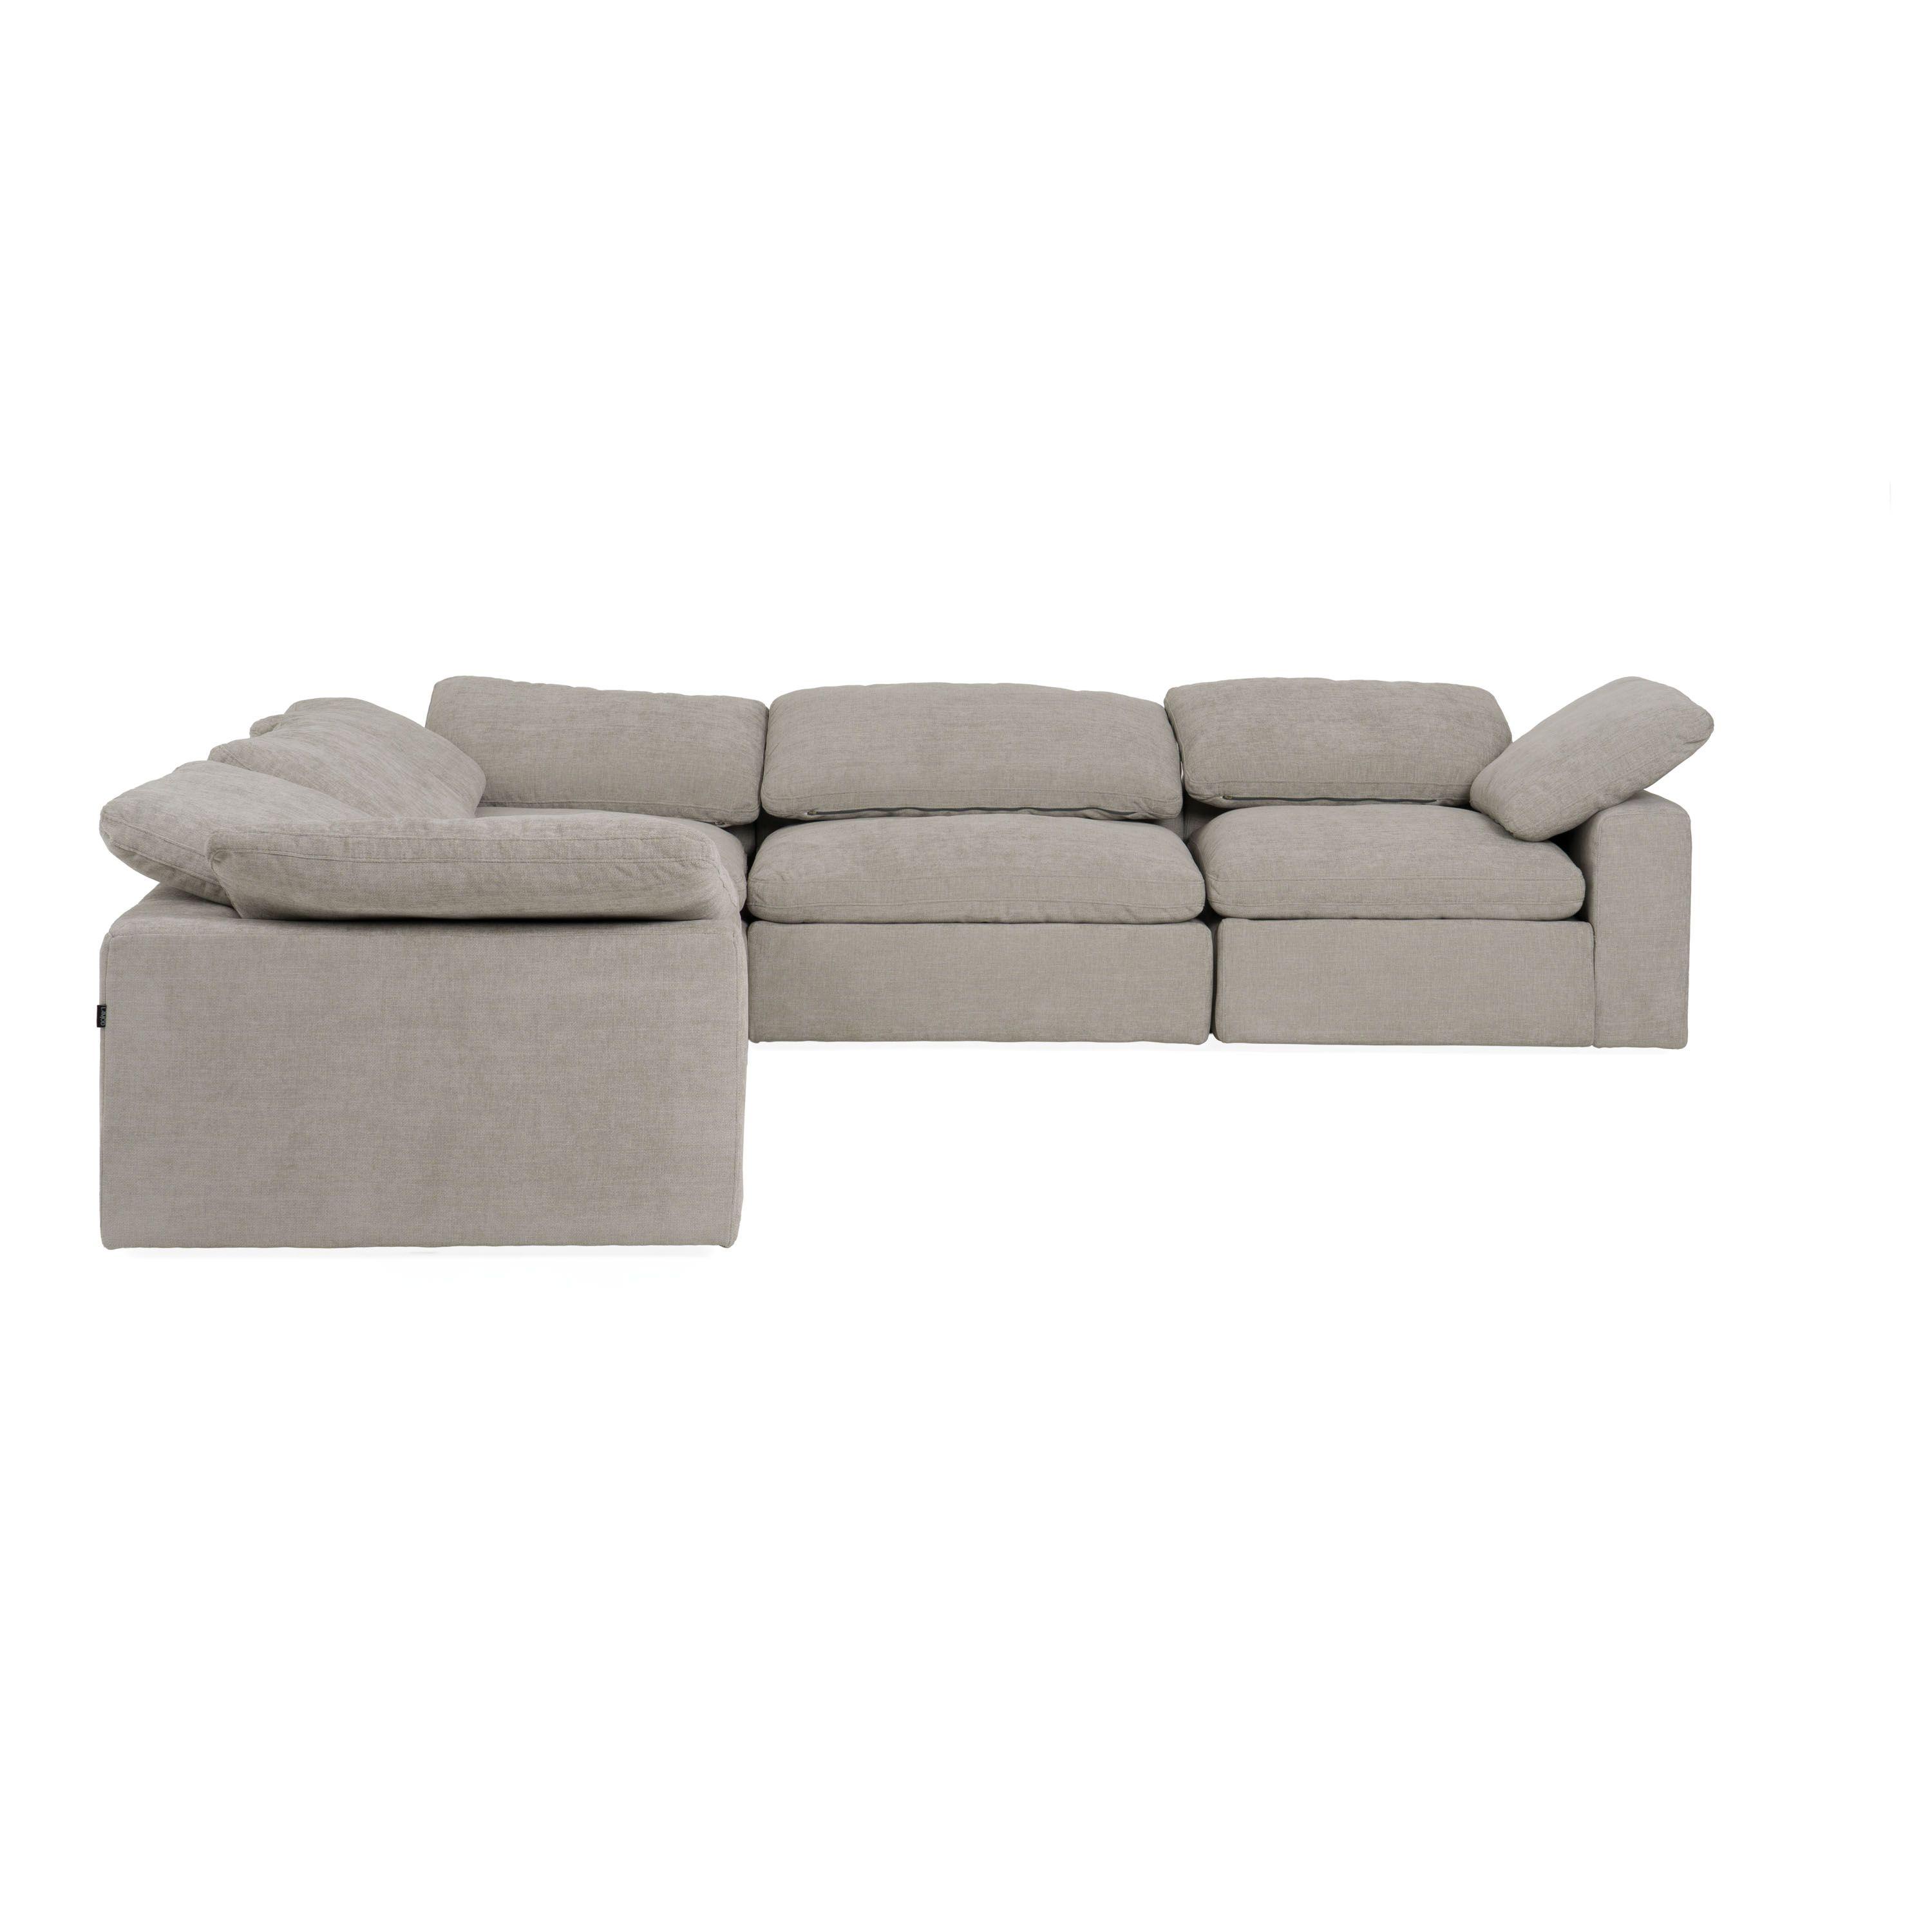 

    
62151949487879Corinth Reclining Sectional Sofa VGKM-KM.920-GRY Reclining Sectional
